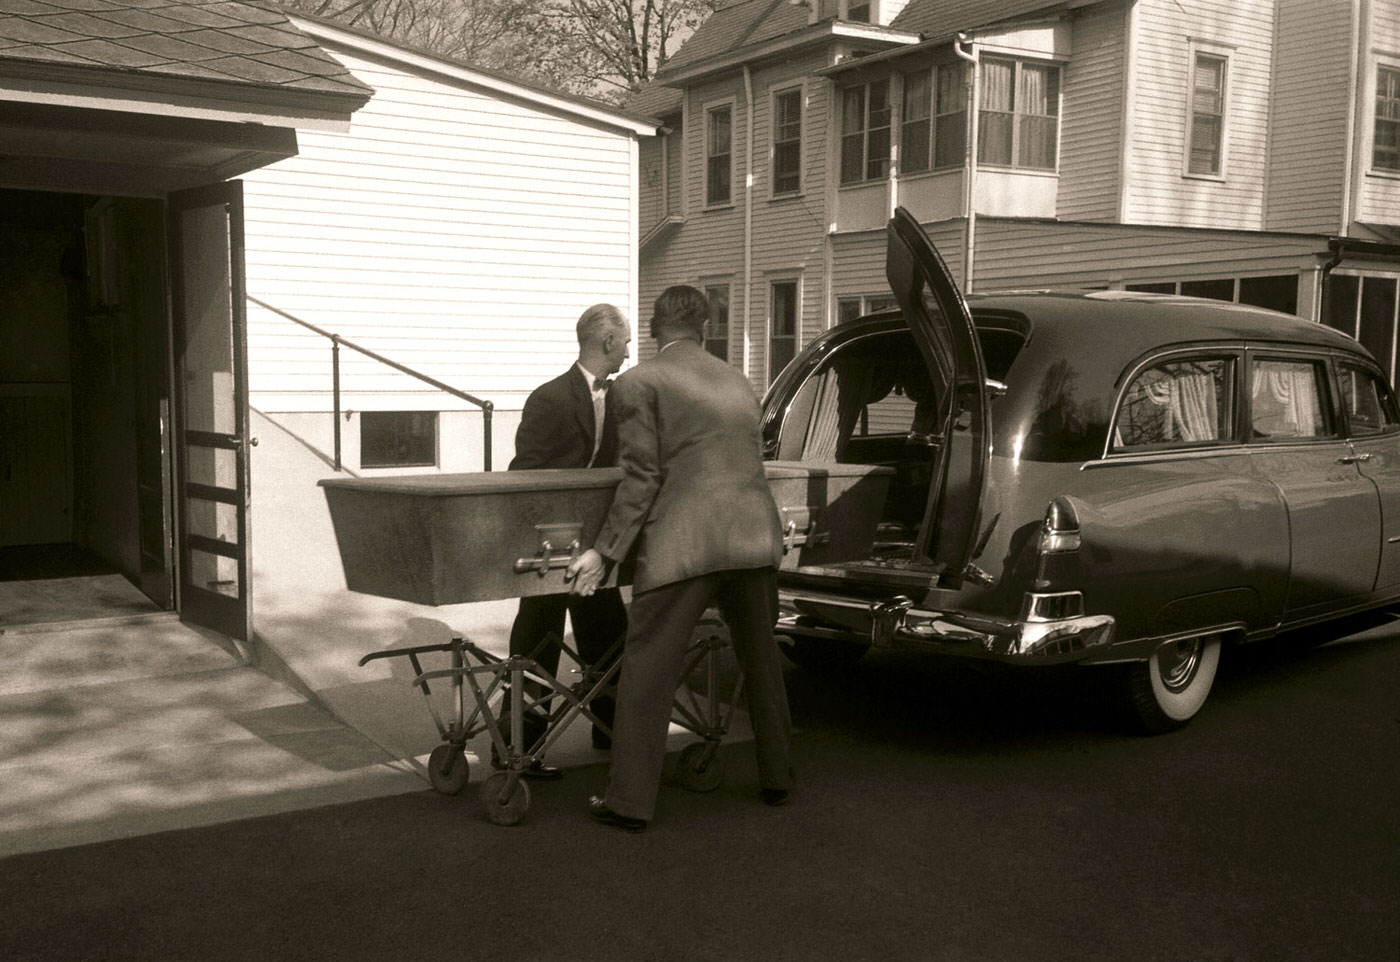 Albert Einstein's casket makes its final journey from Princeton Hospital to a funeral home in Princeton, New Jersey, in April 1955.